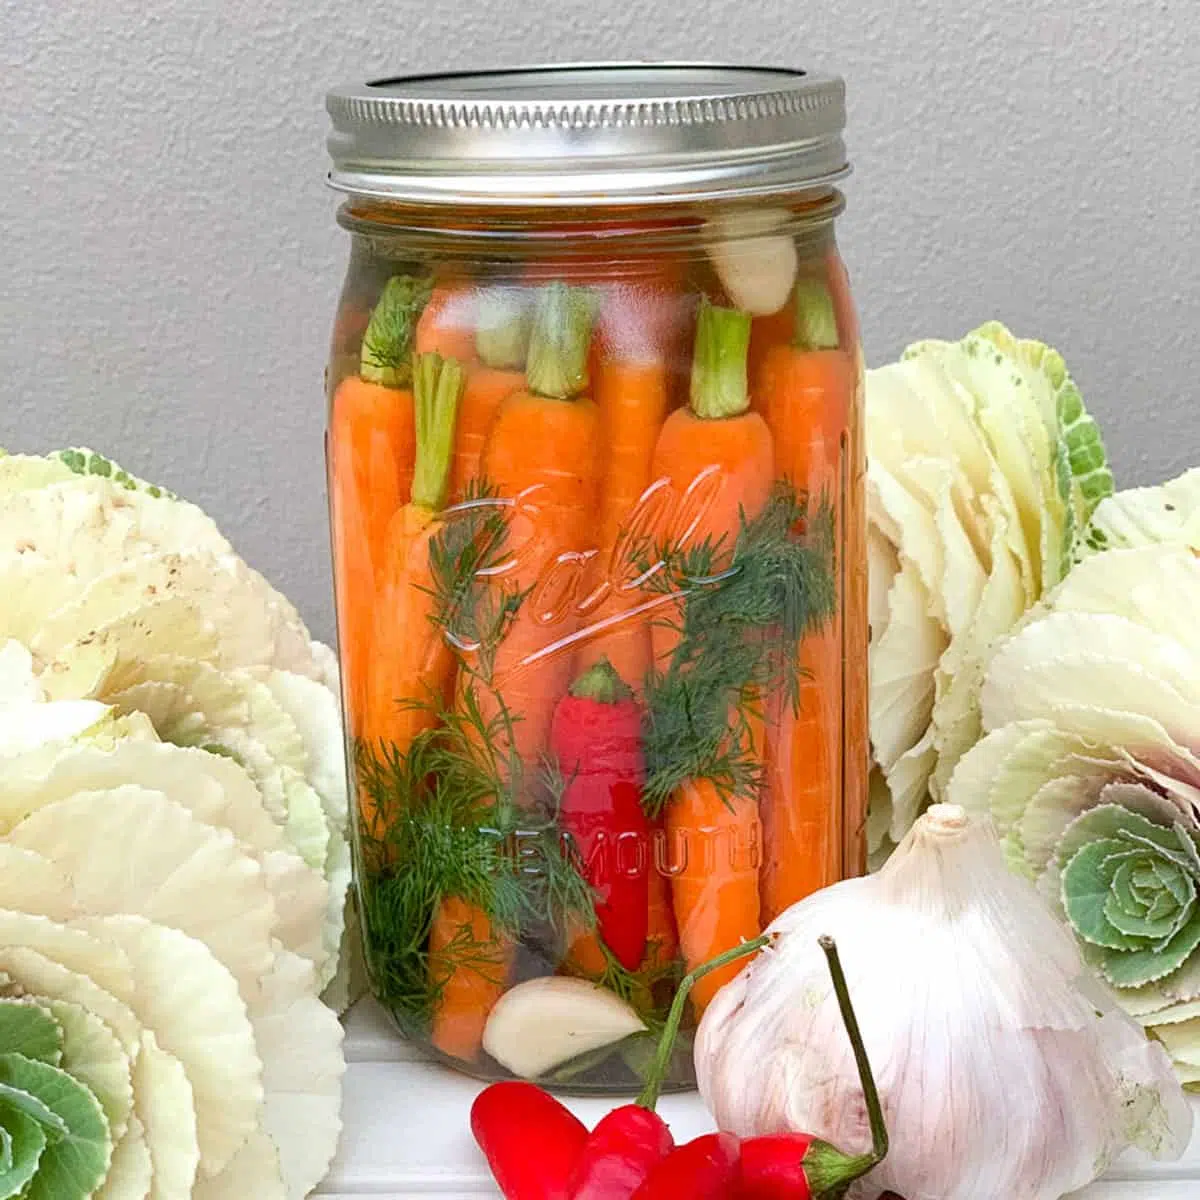 Fermented carrots with garlic, chilli and dill